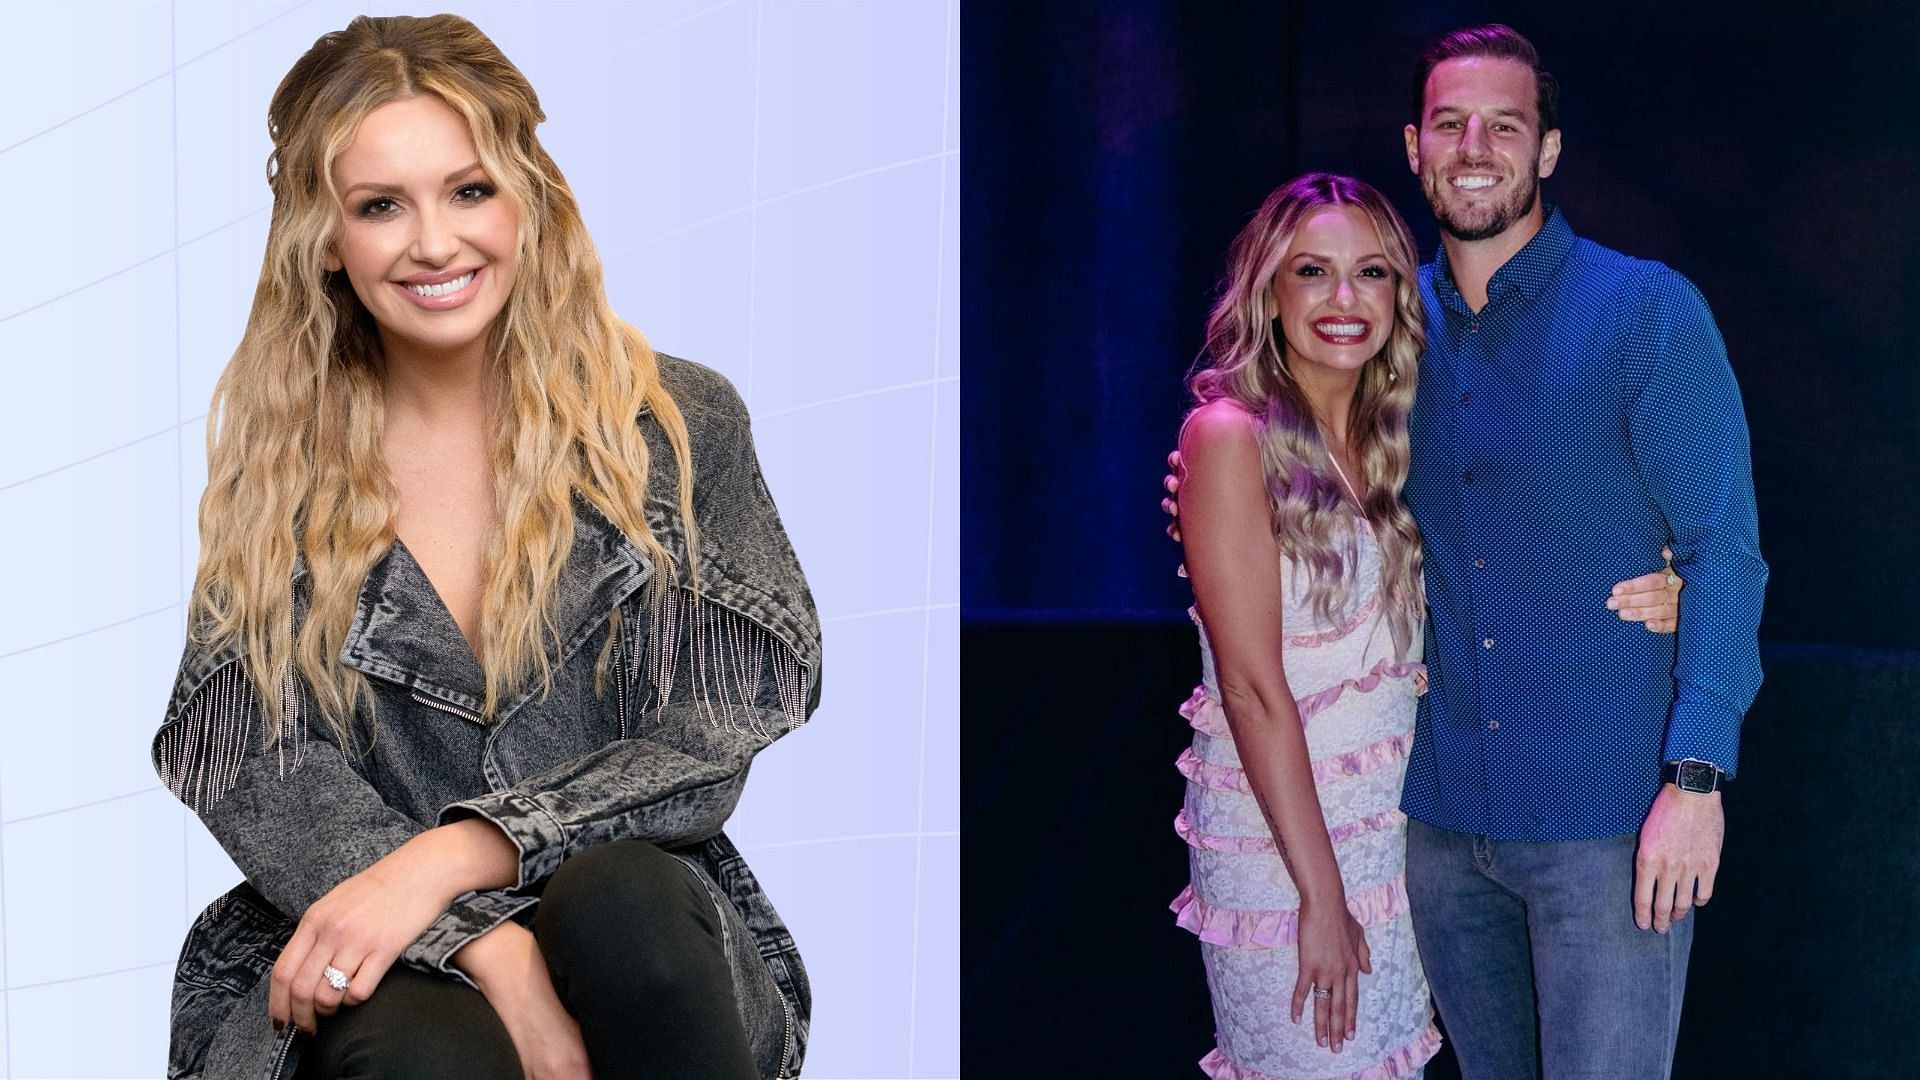 Who is Riley King? All about Carly Pearce's date at CMA Awards as